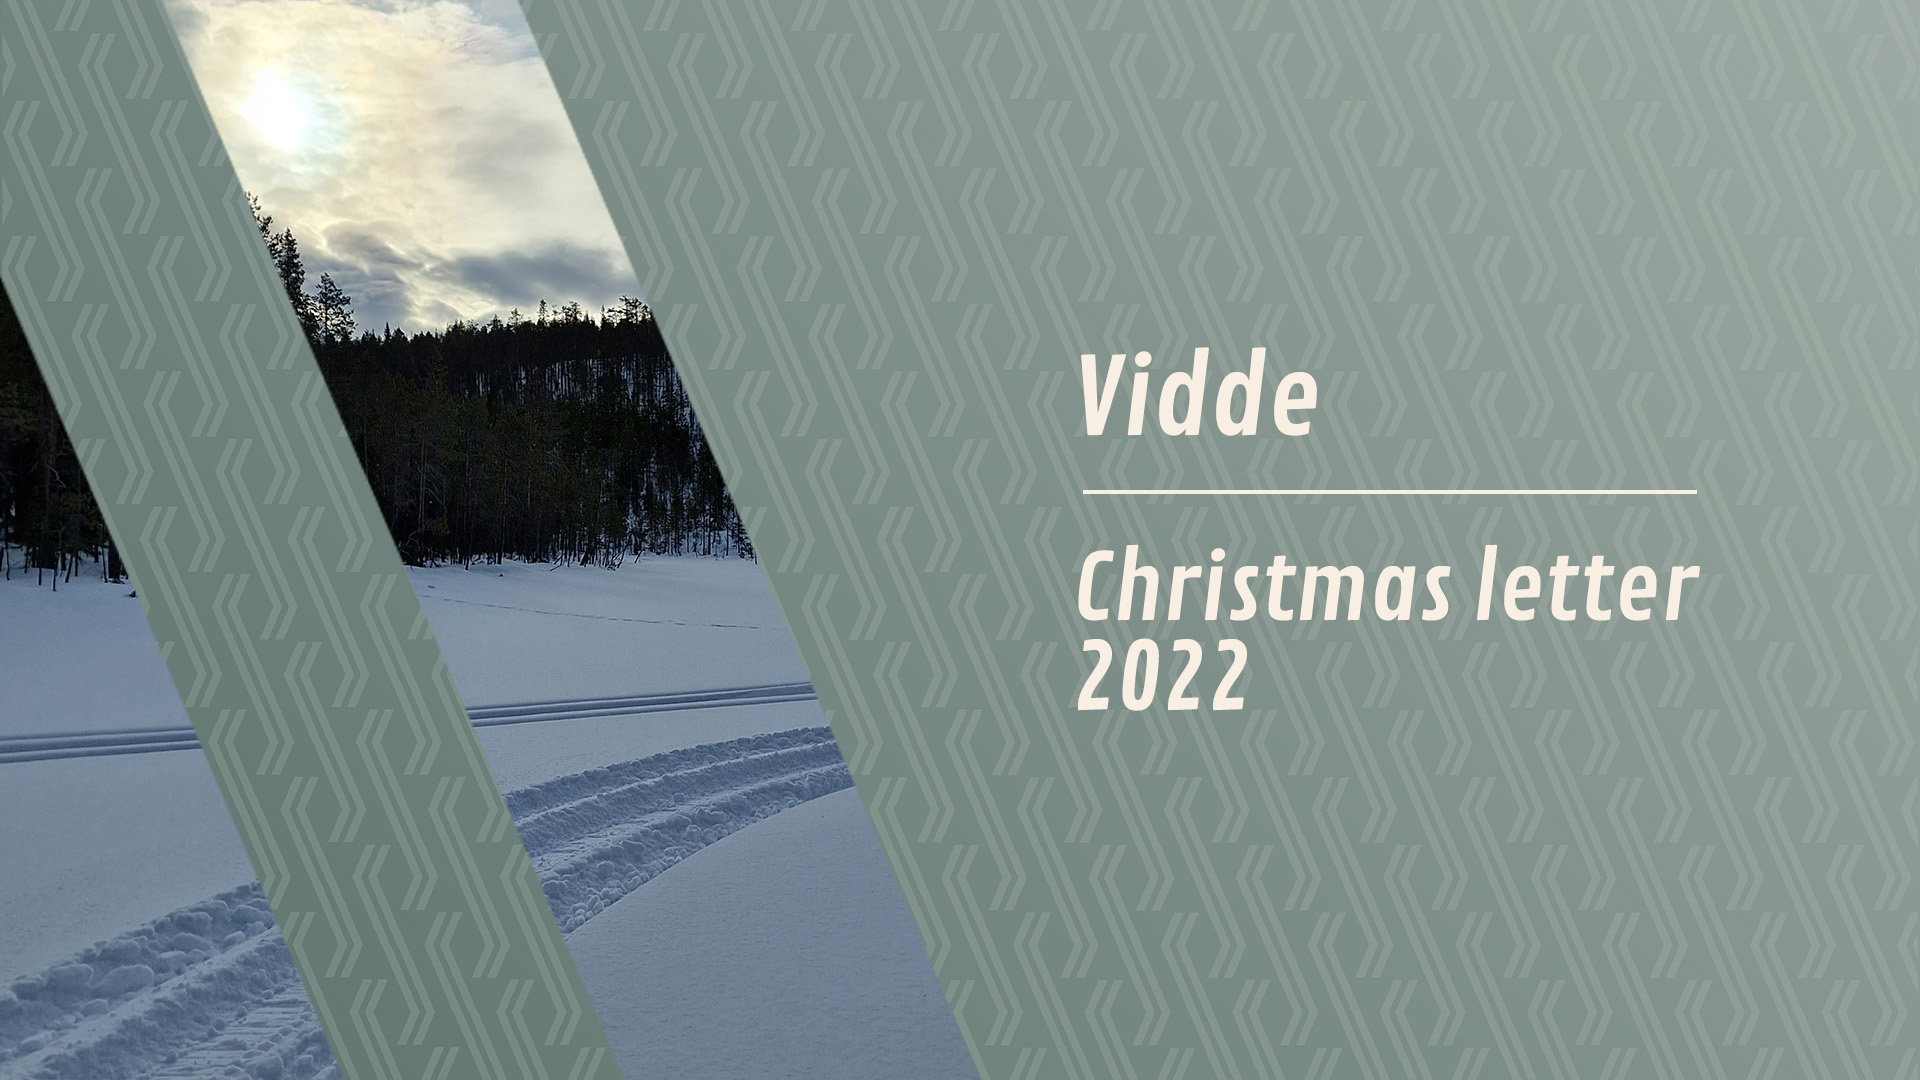 CEO Christmas Letter 2022